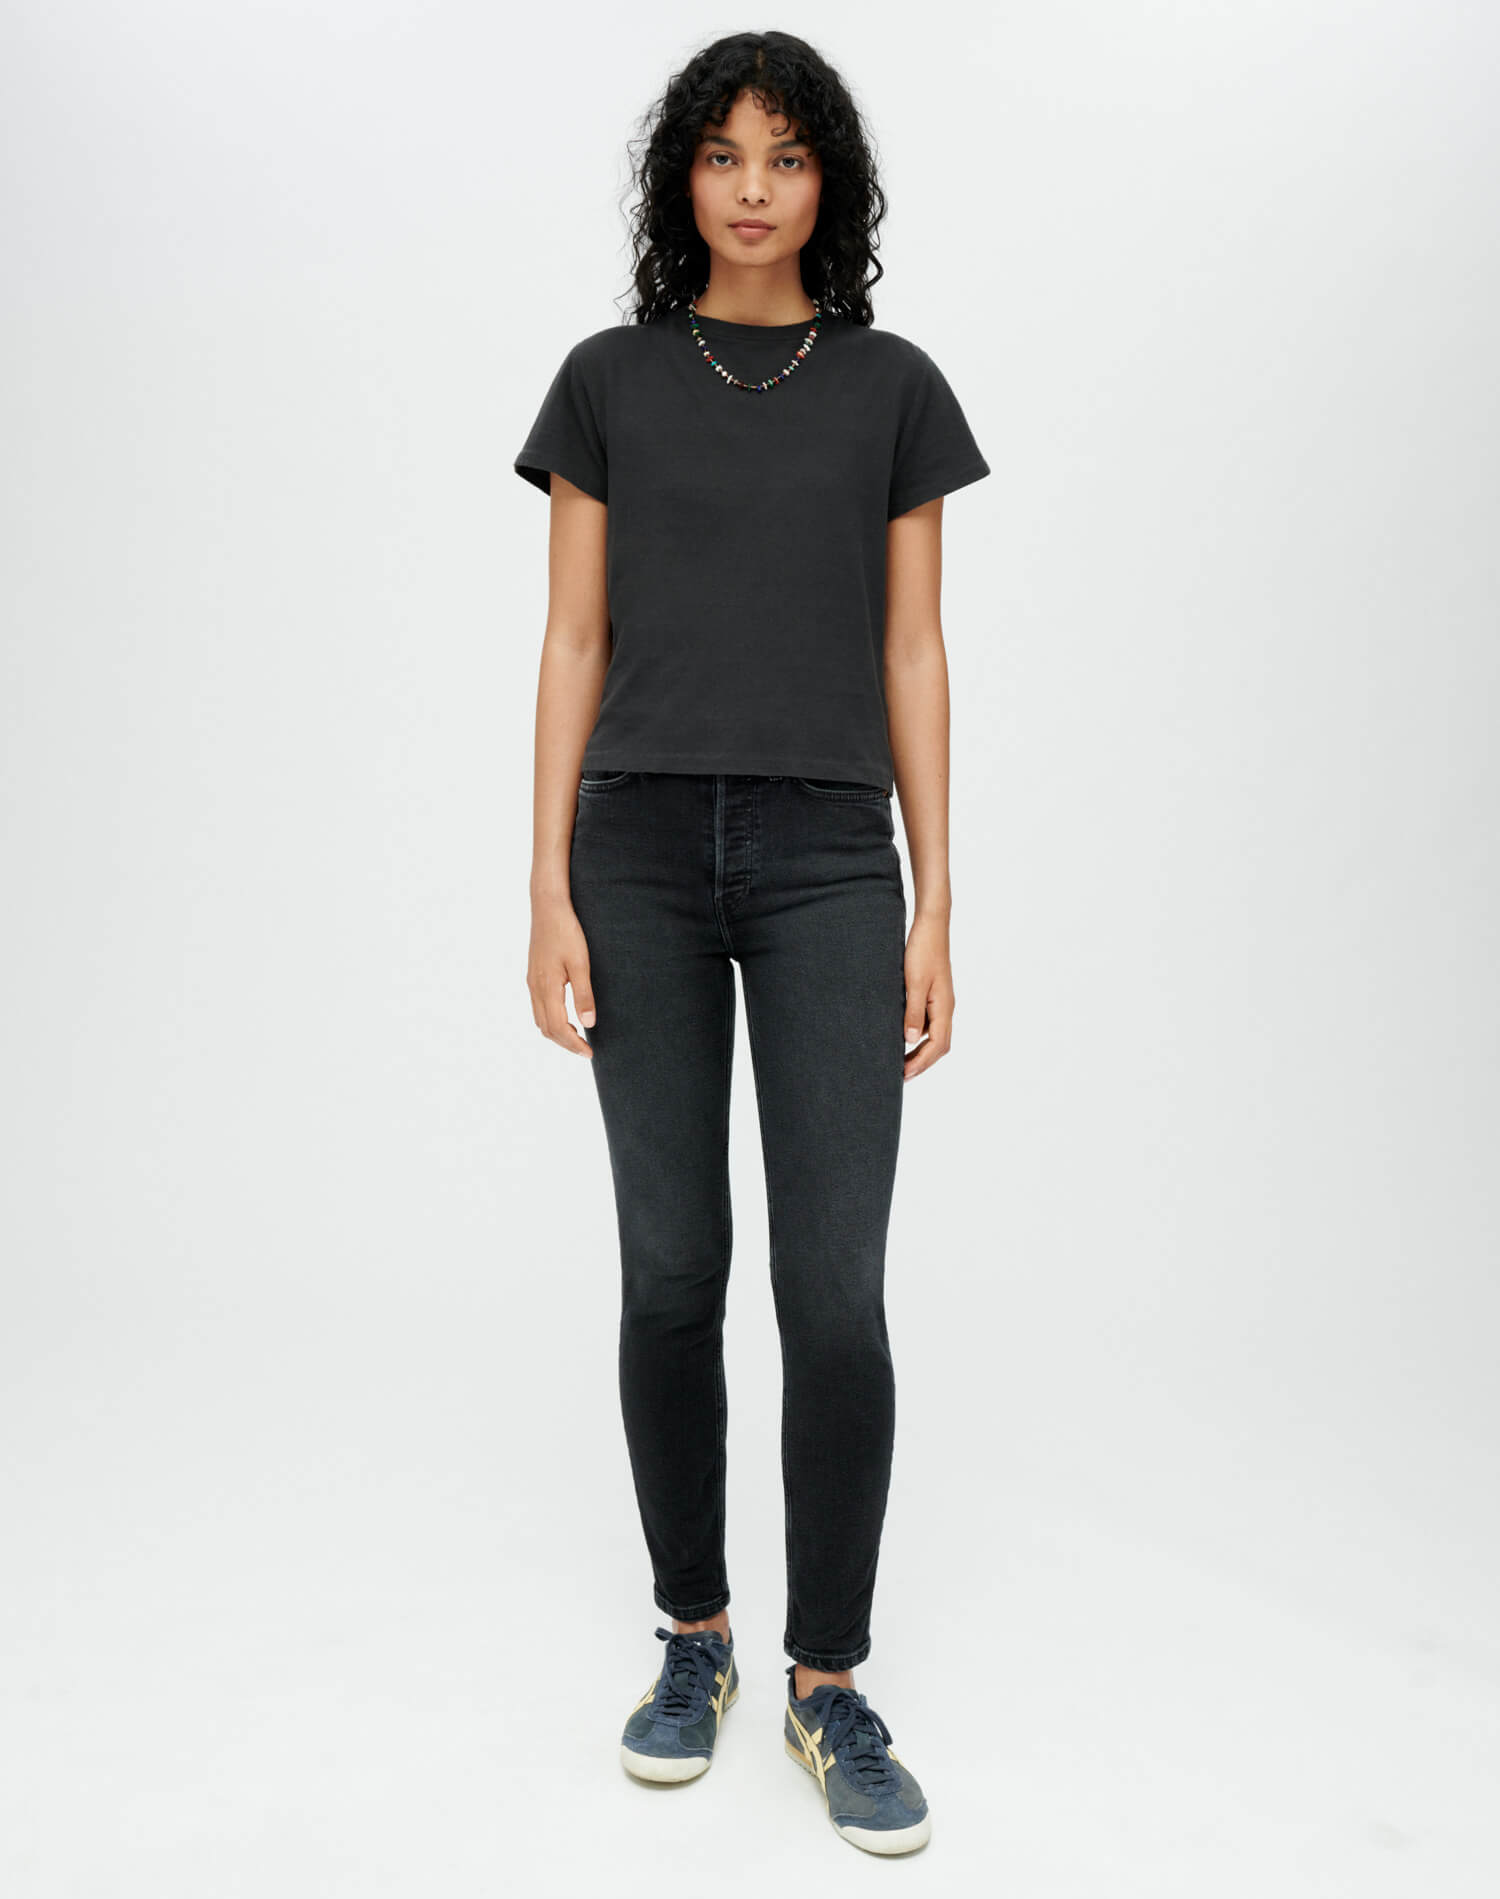 Hanes Classic Tee - Washed Black